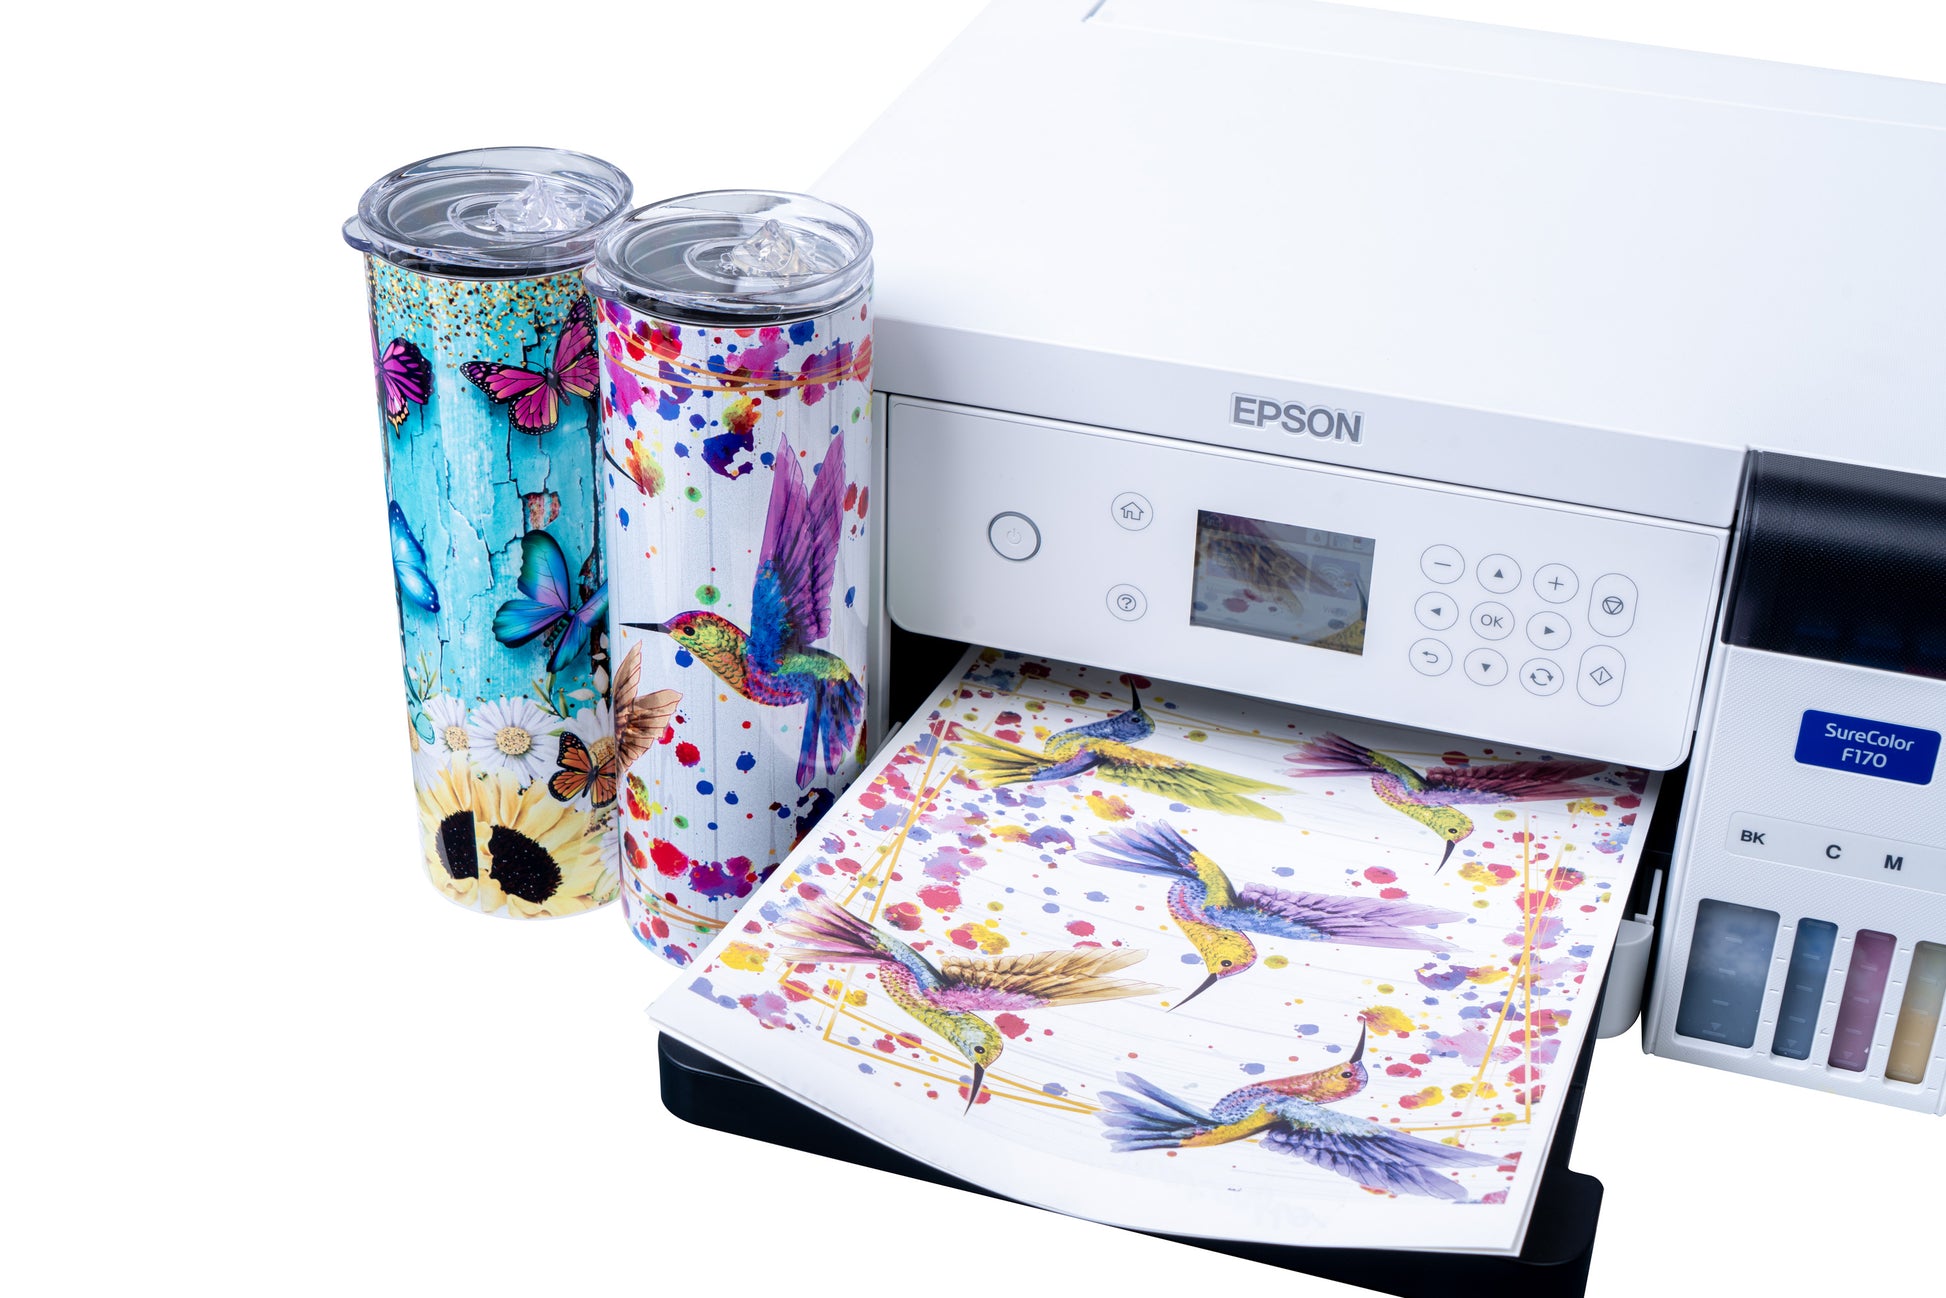 A Sub Sublimation Paper & Epson F170 First Prints 